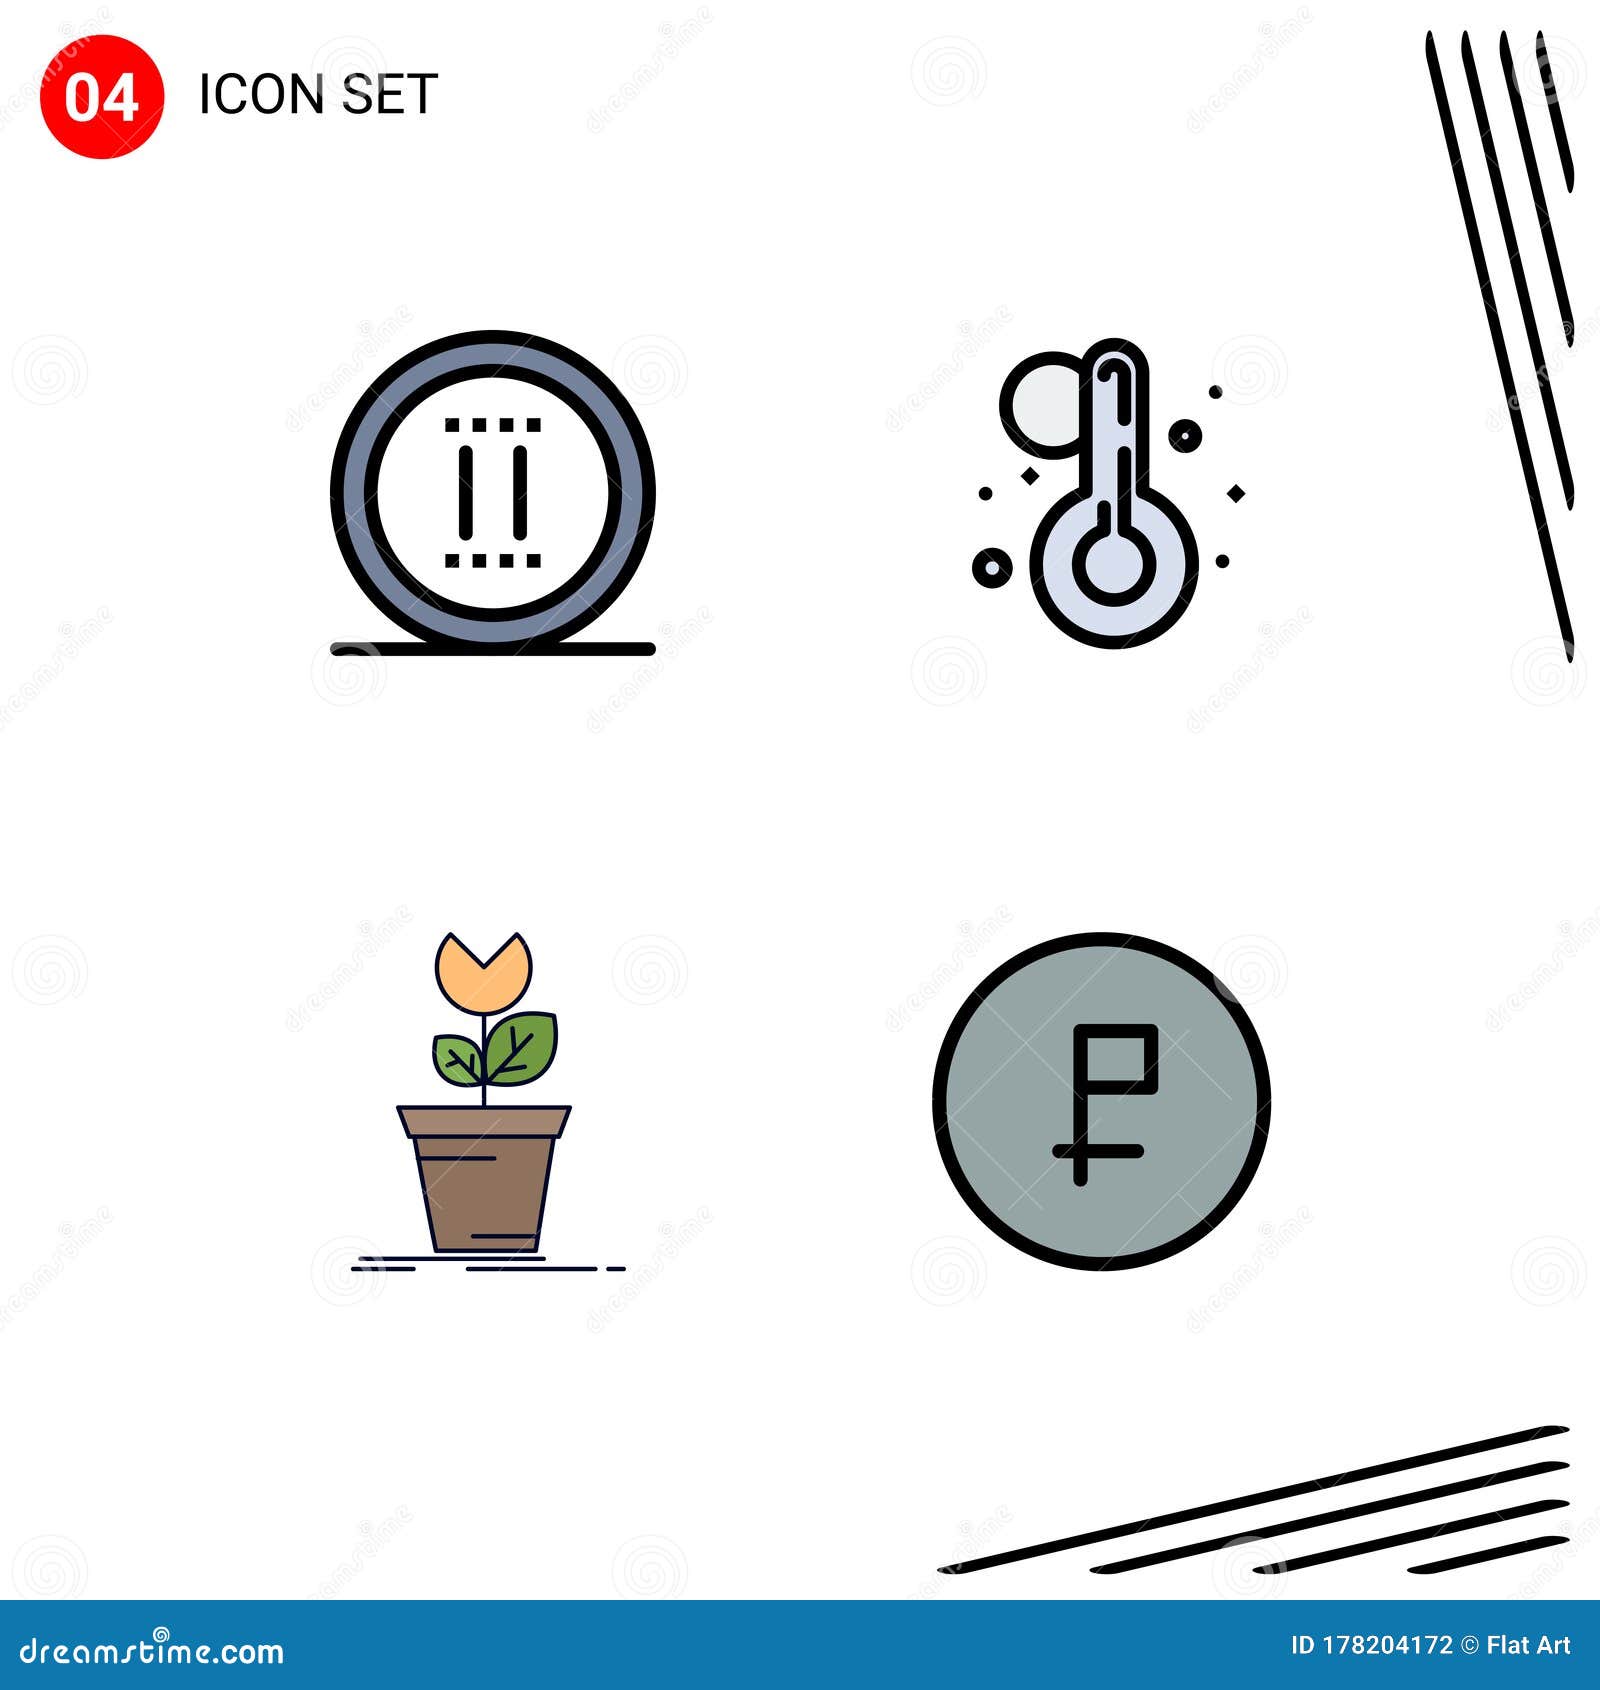 https://thumbs.dreamstime.com/z/filledline-flat-color-pack-universal-symbols-movie-mario-pause-thermometer-plant-editable-vector-design-elements-stock-icon-178204172.jpg